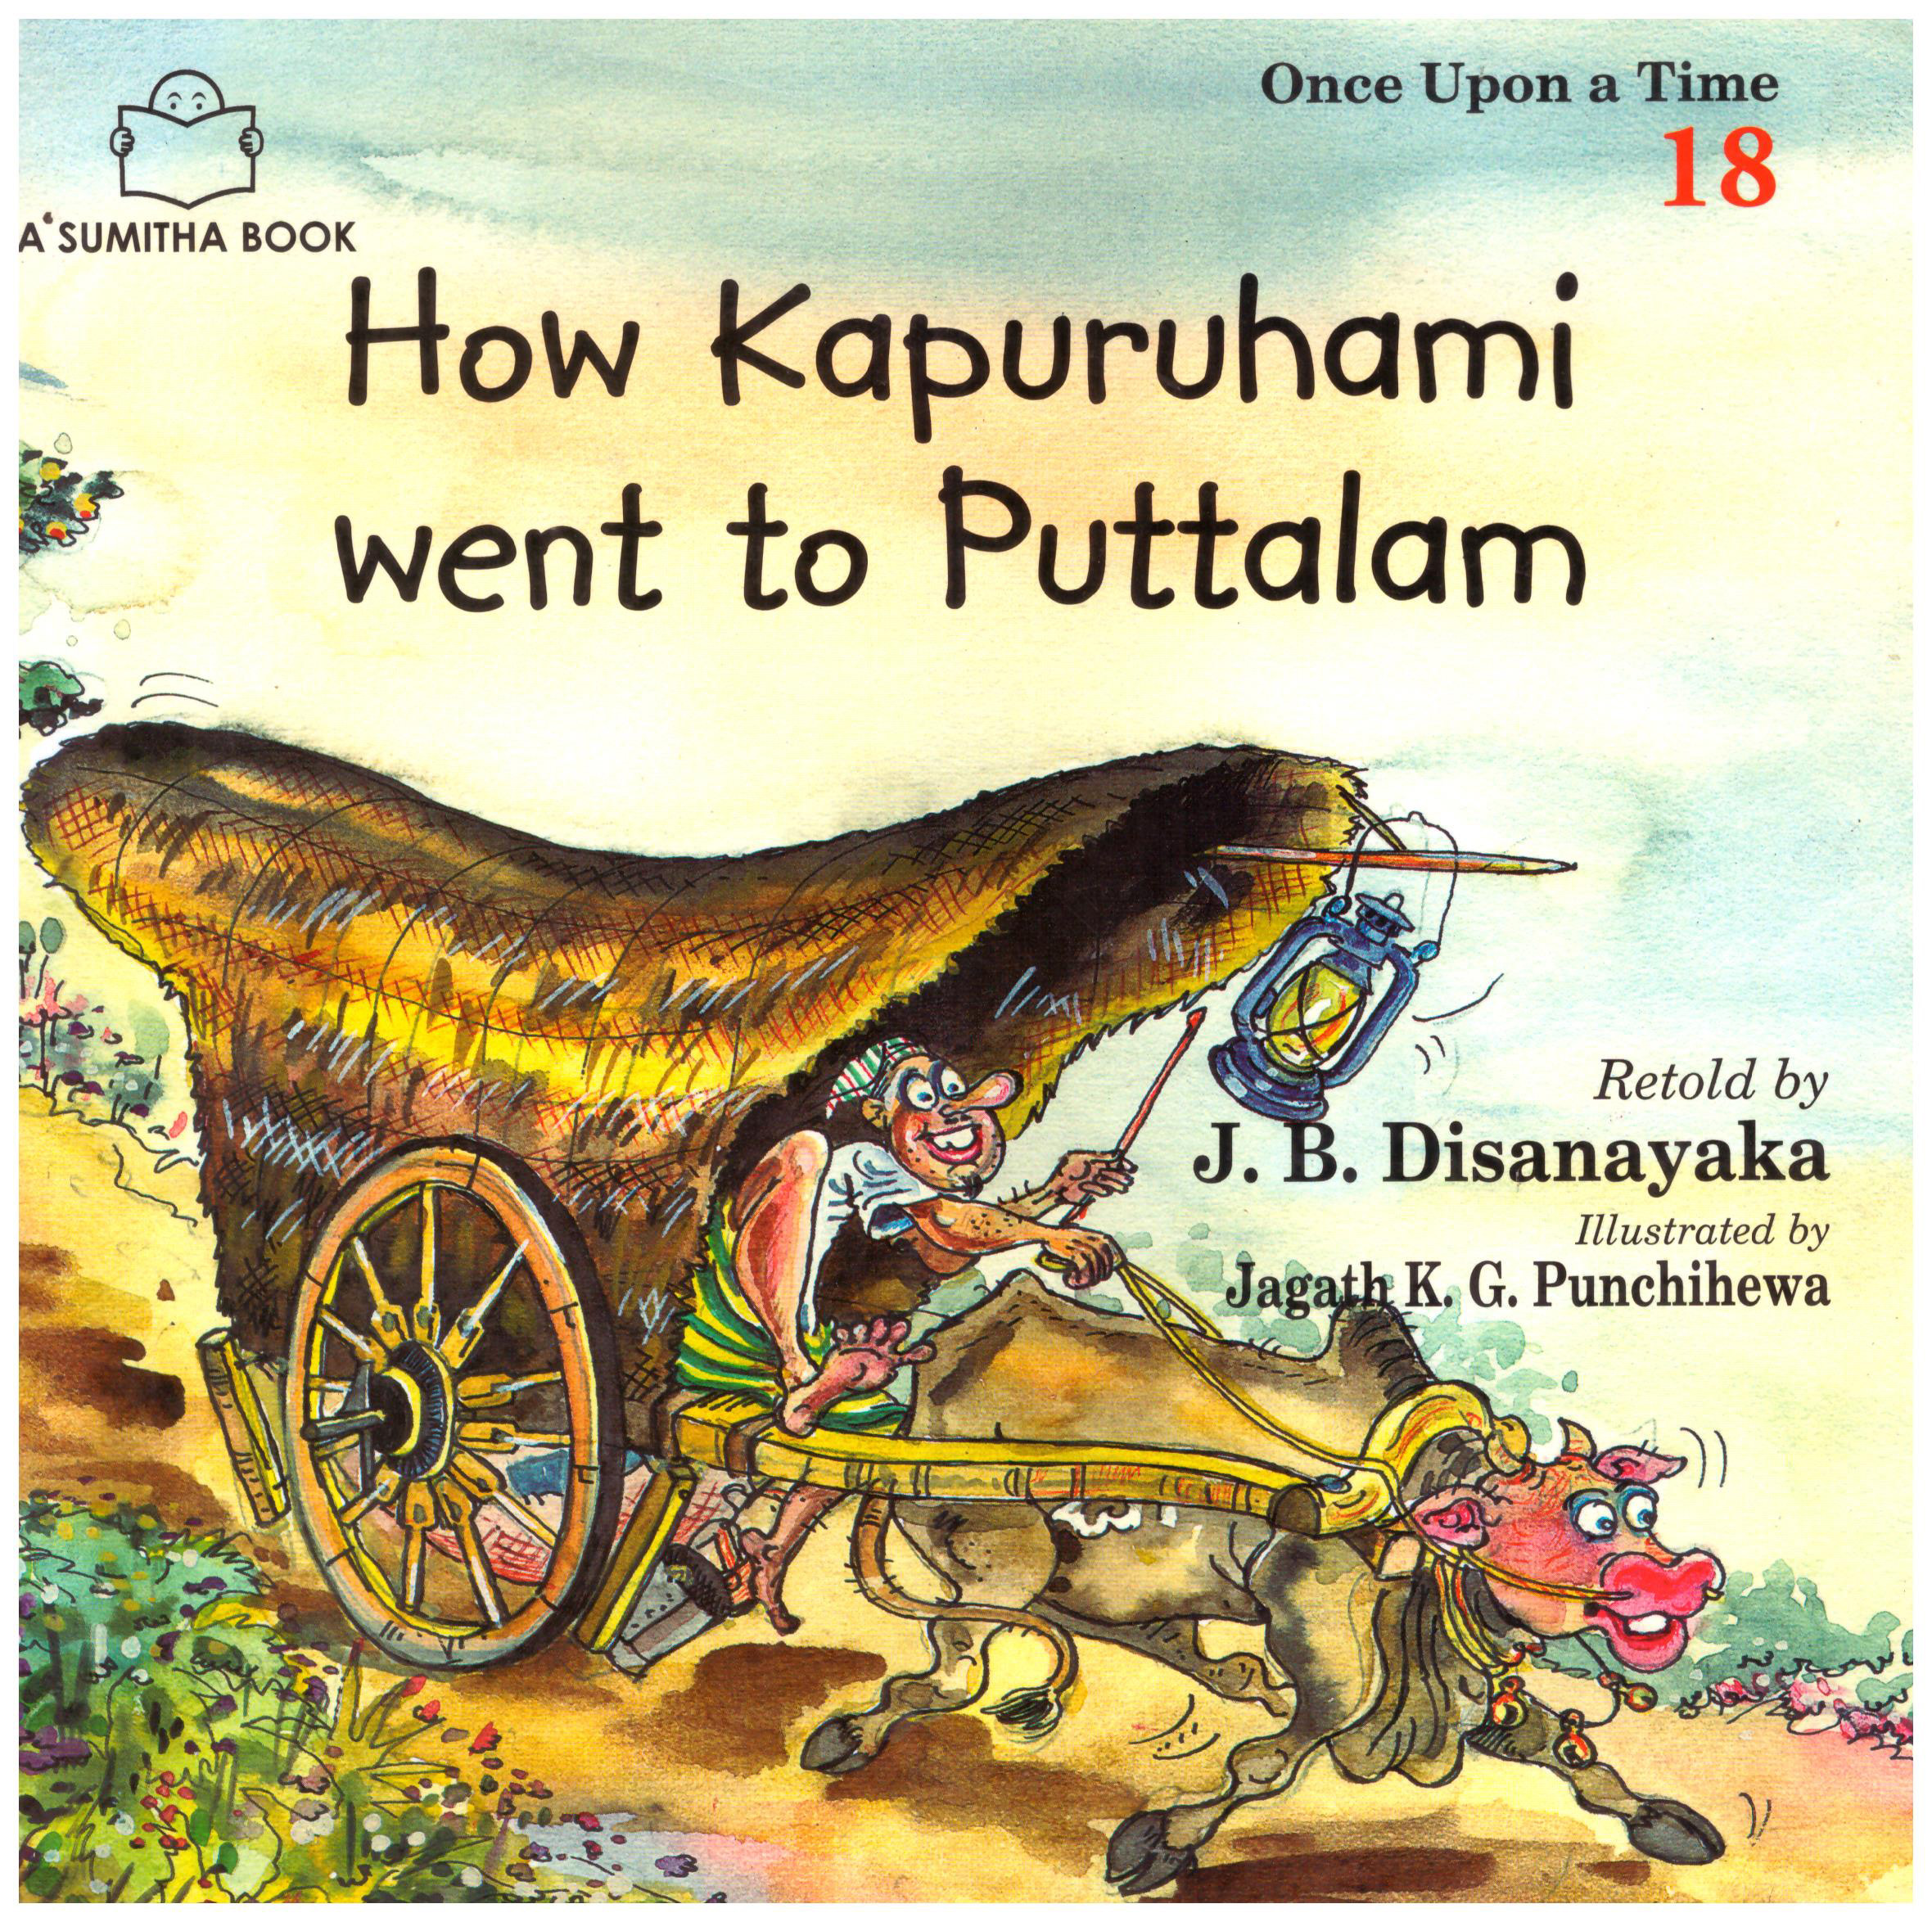 Once Upon a Time 18 - How Kapuruhami Went to Puttalam